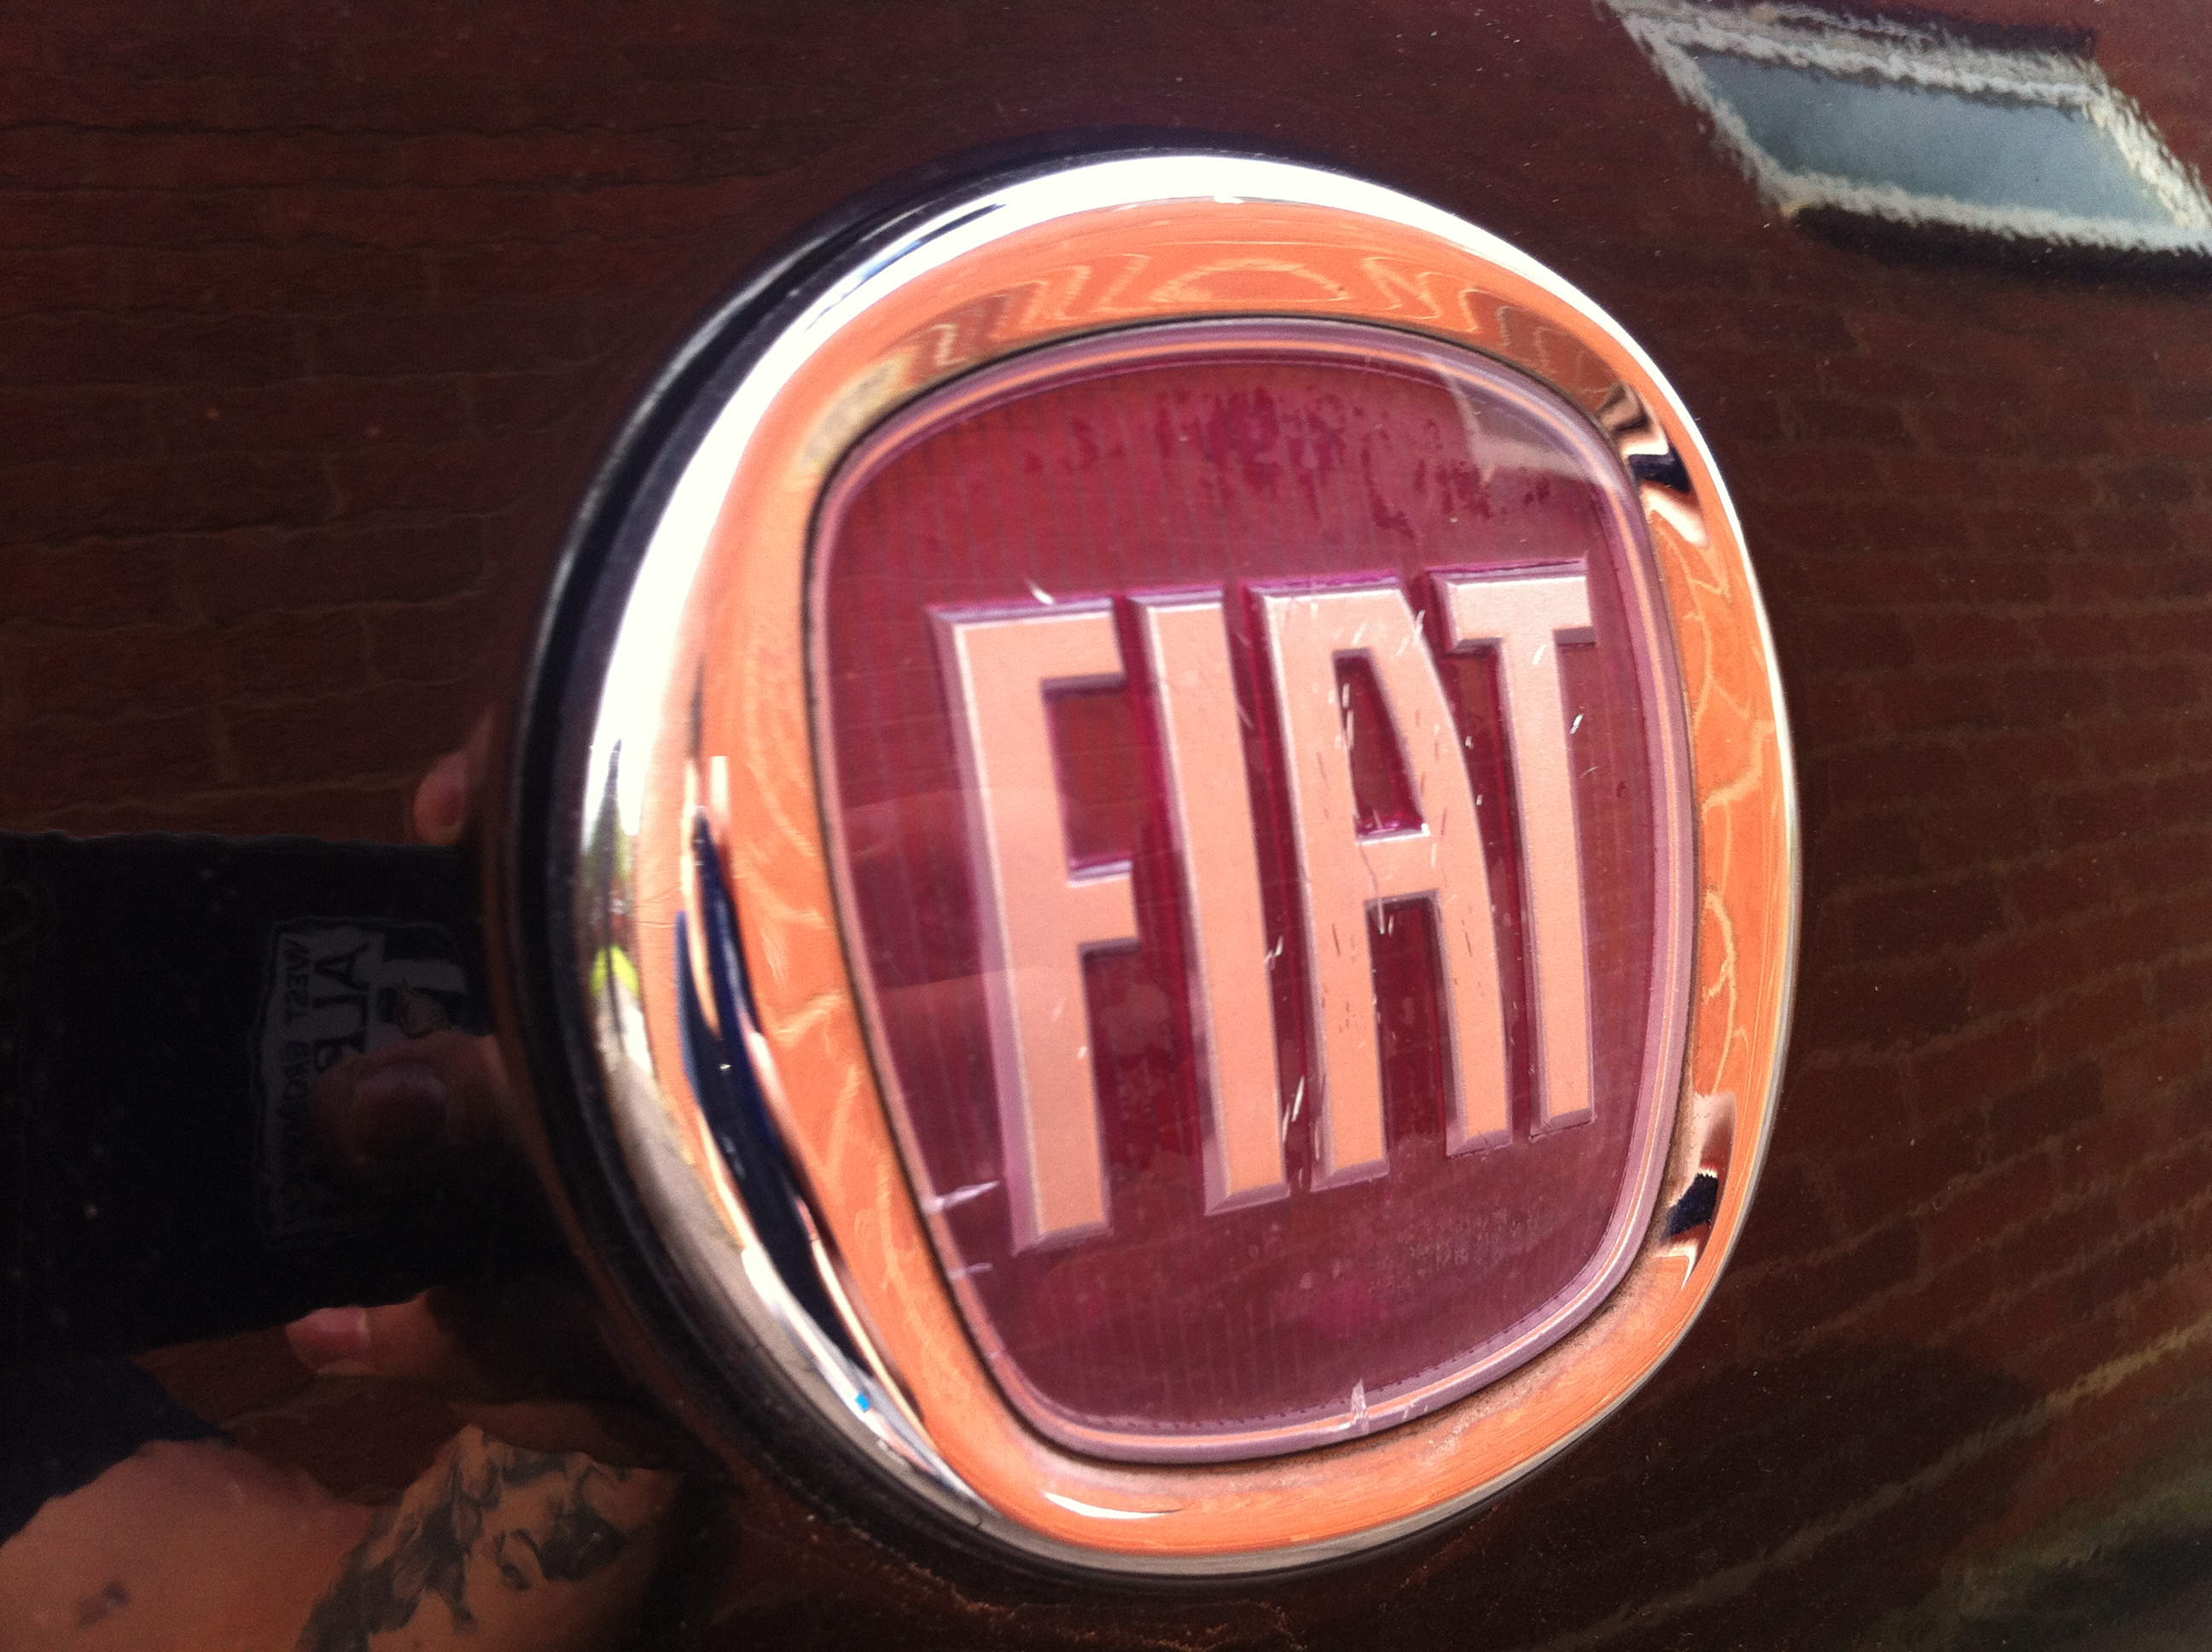 4 year old fiat badge